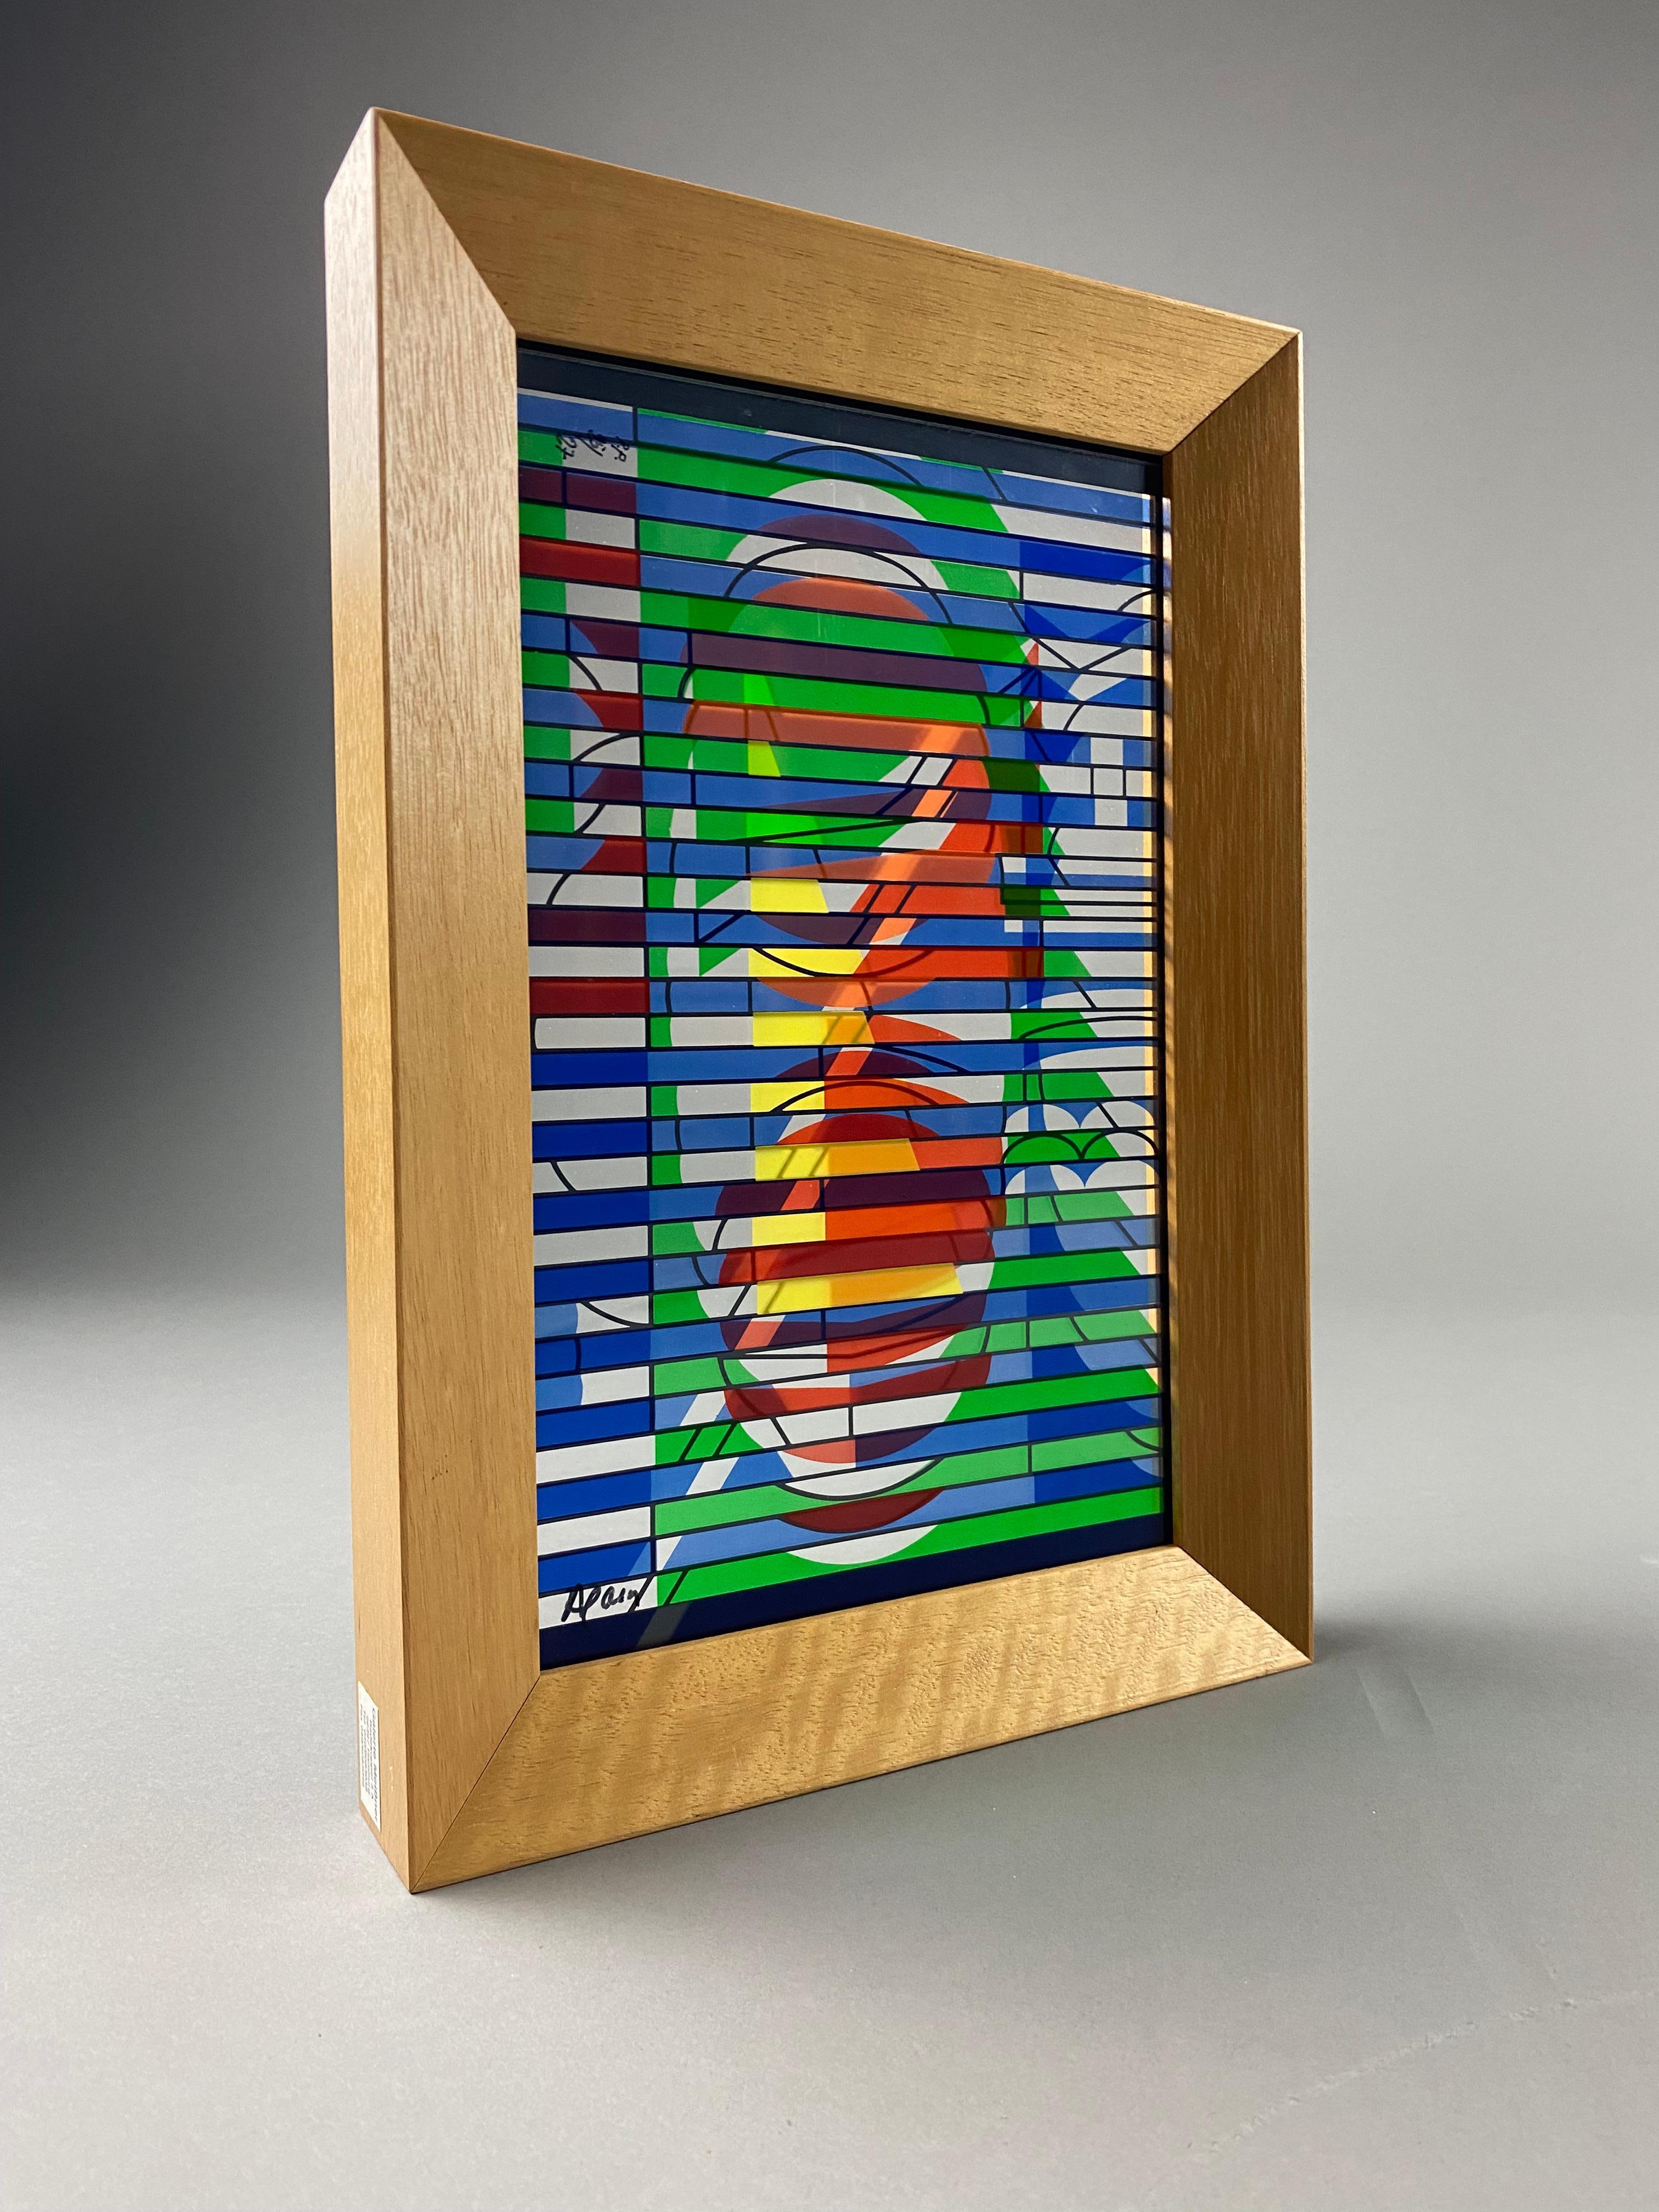 Art Yaacov Agam
Signed and numbered 25/27 from the Meissner Galerie in Hamburg
Measurements: H 33 x W 23 x D 4 cm.
Agam's first solo exhibition was at the Galerie Craven, Paris, in 1953, and he exhibited three works at the 1954 Salon des Réalités